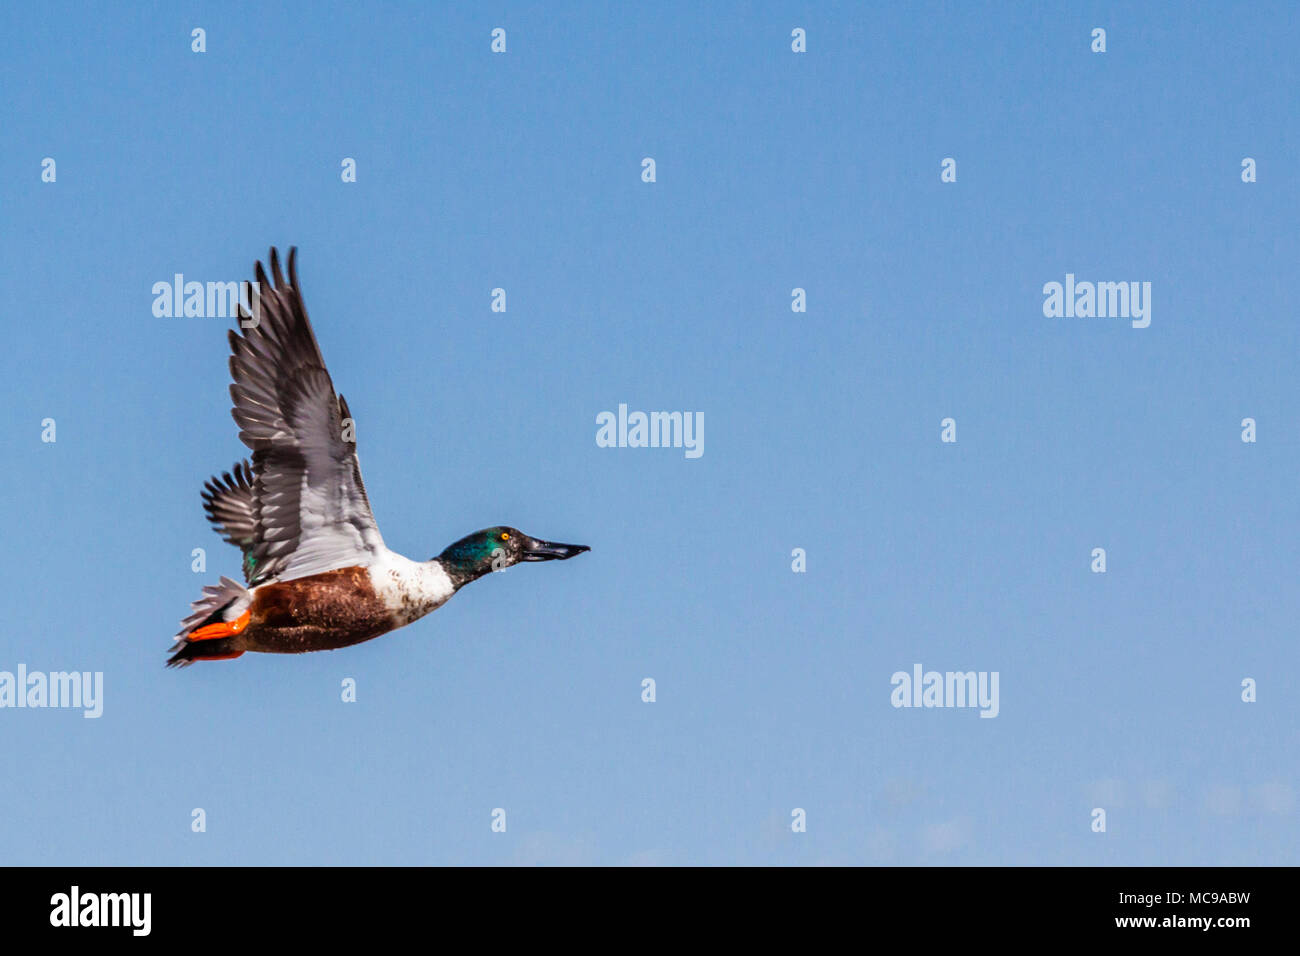 Northern Shoveler duck, Anas clypeata, at Bosque del Apache National Wildlife Refuge in New Mexico. Stock Photo